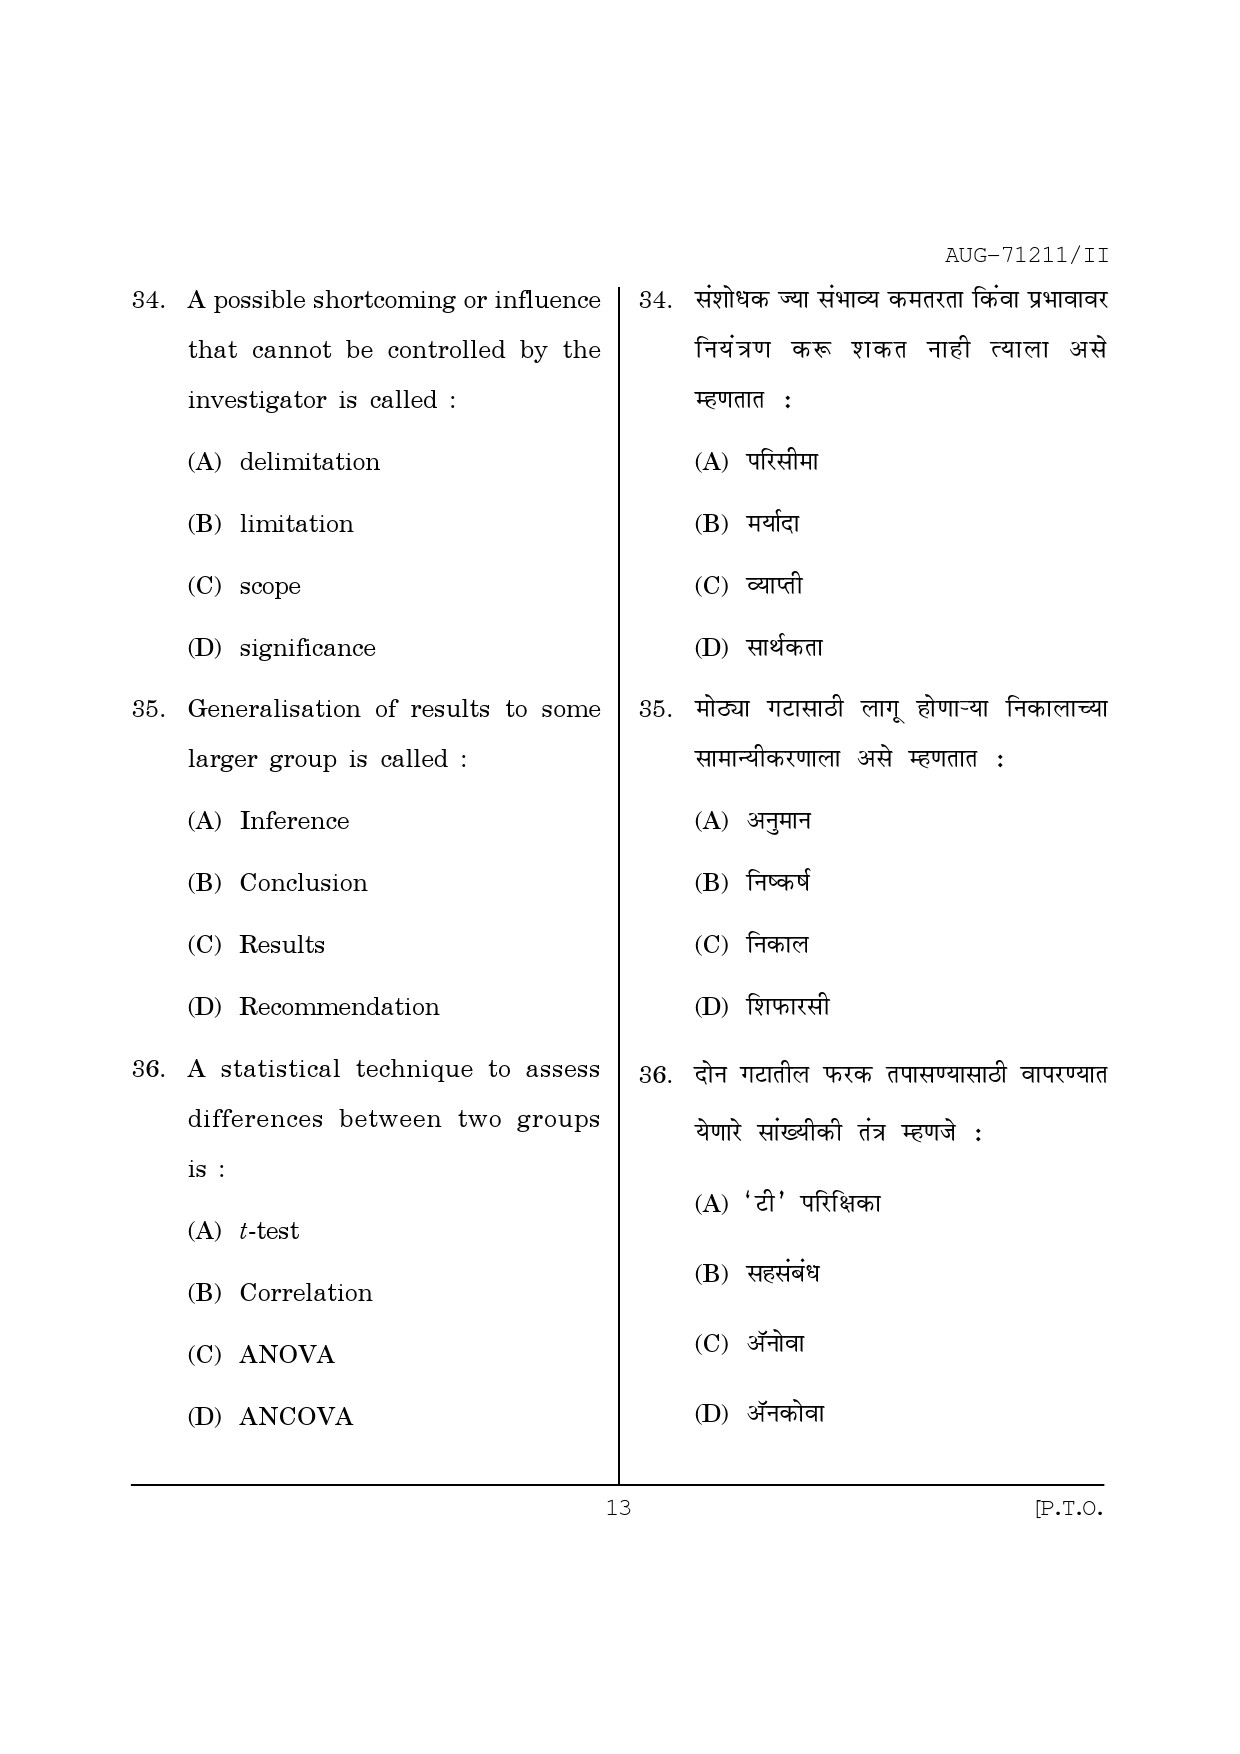 Maharashtra SET Physical Education Question Paper II August 2011 13